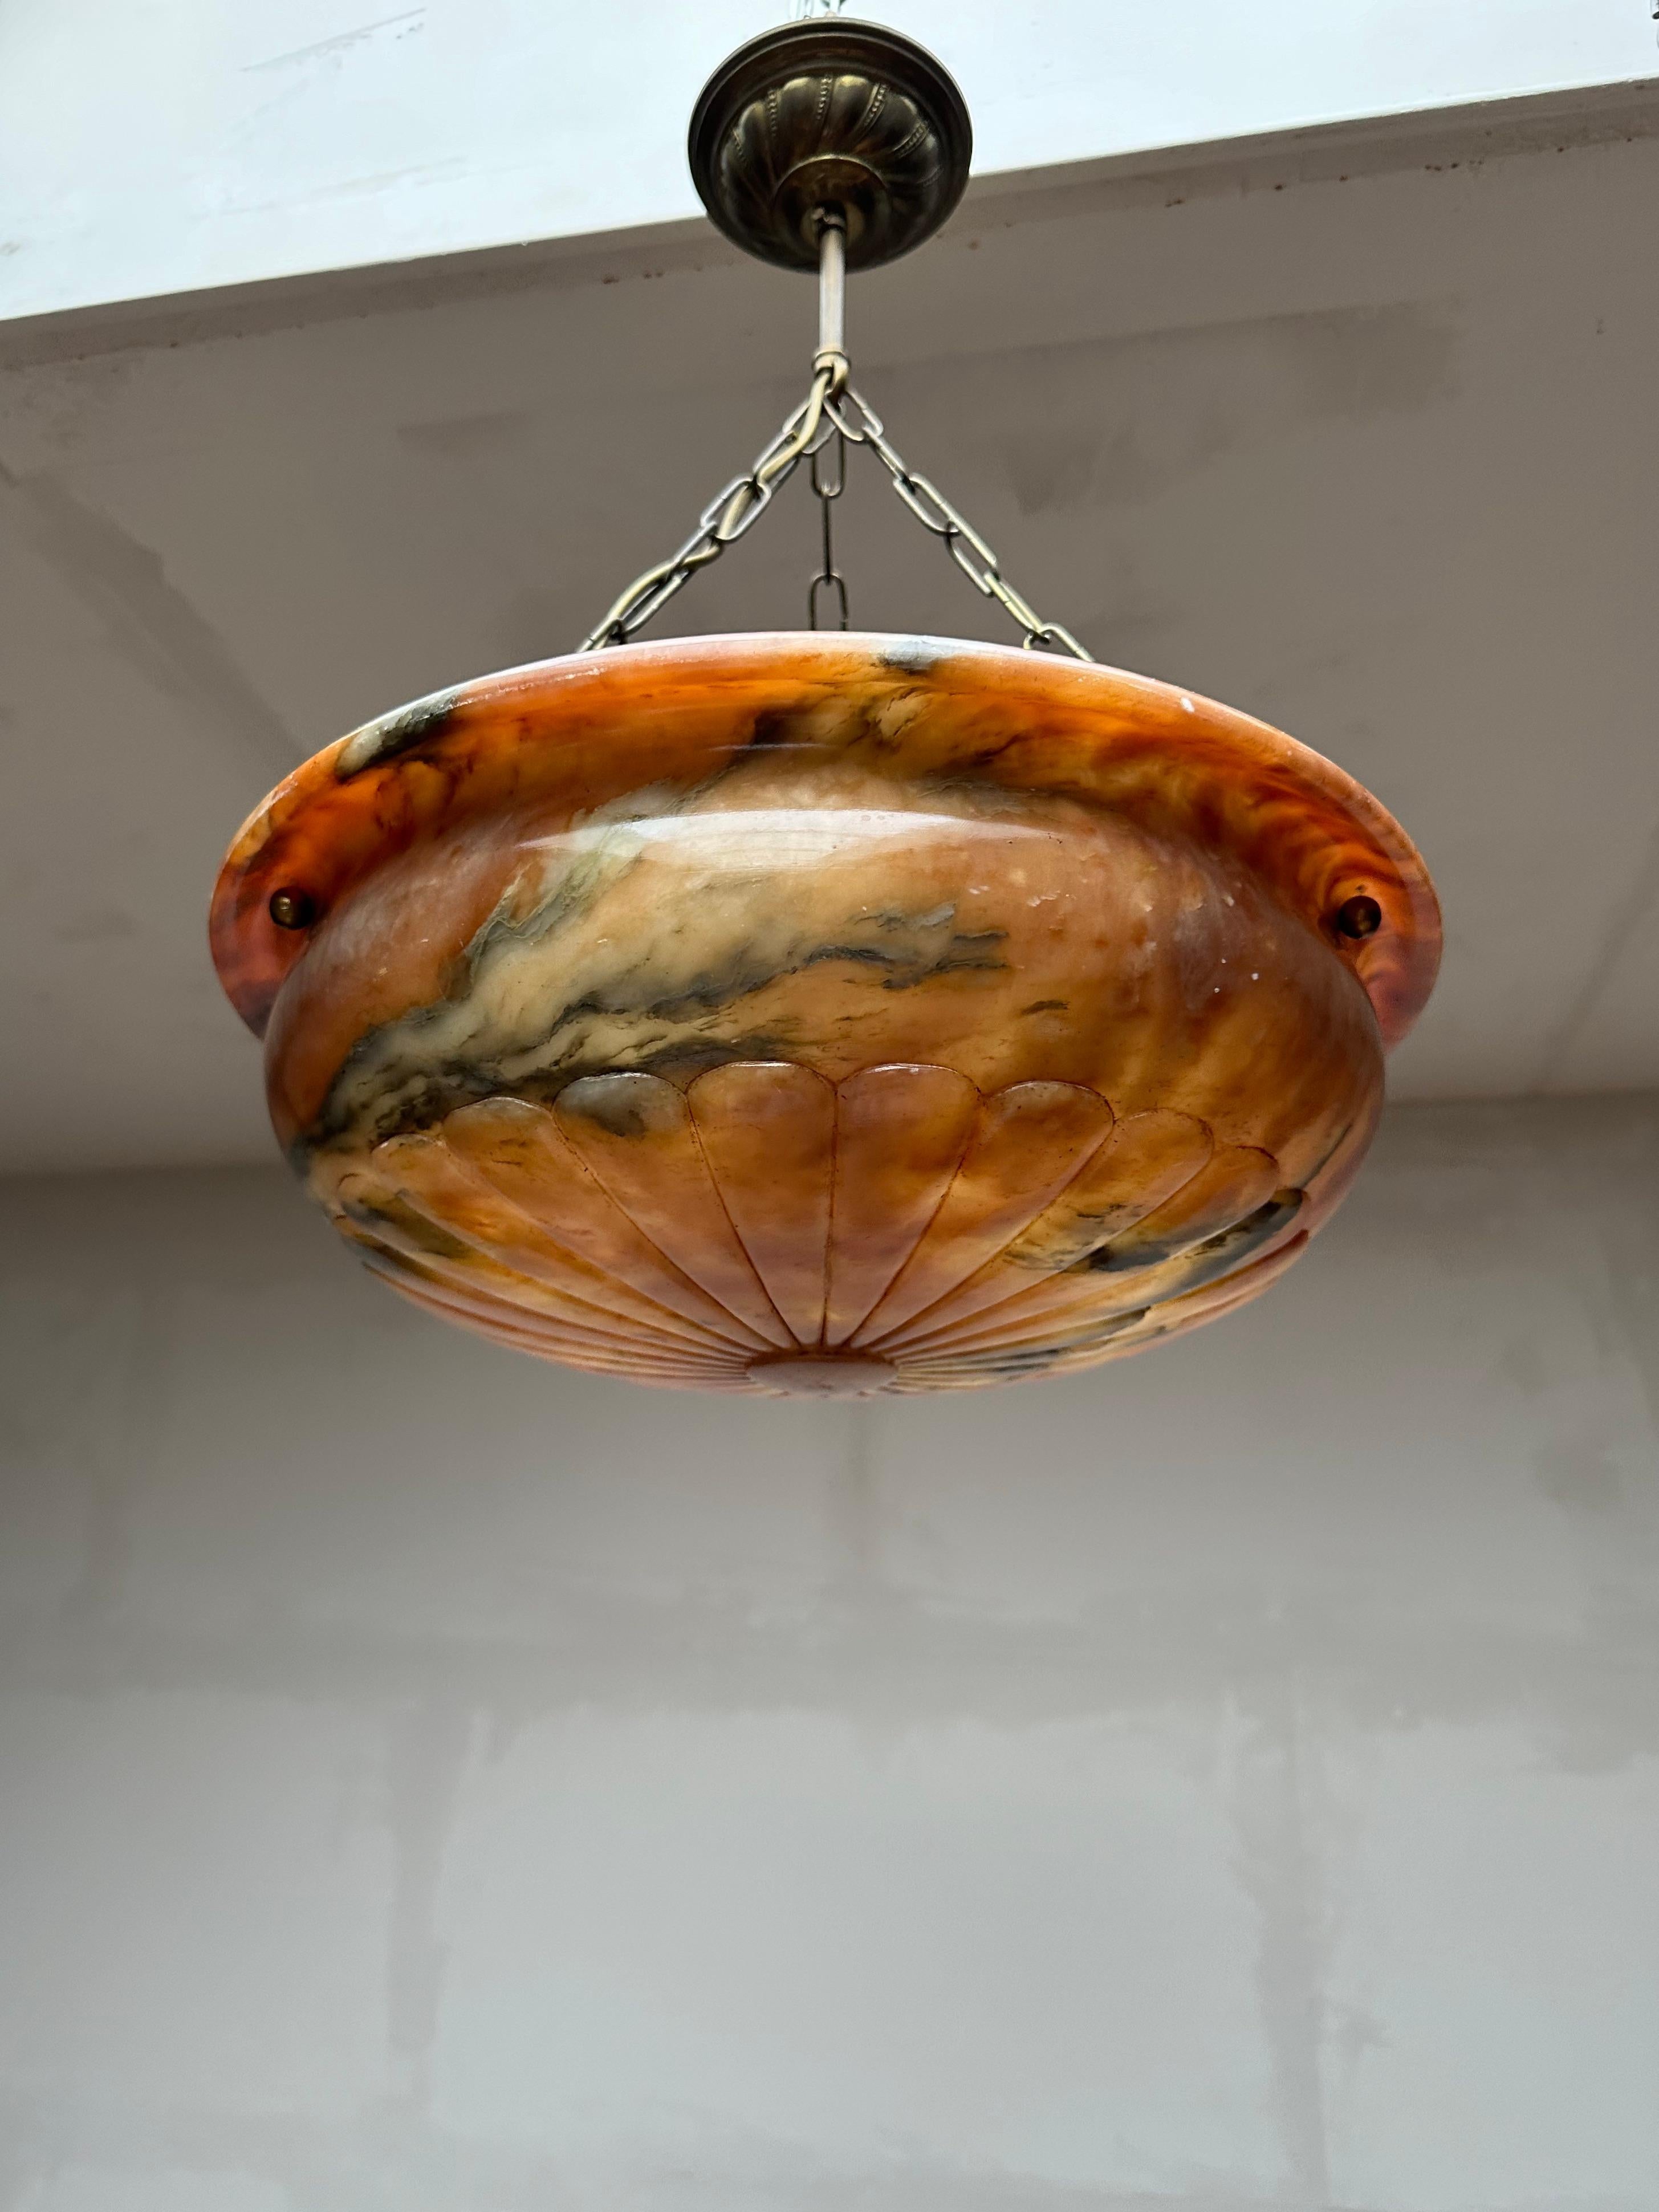 Perfectly Design Antique Alabaster Chandelier / Pendant Light in Mint Condition For Sale 11